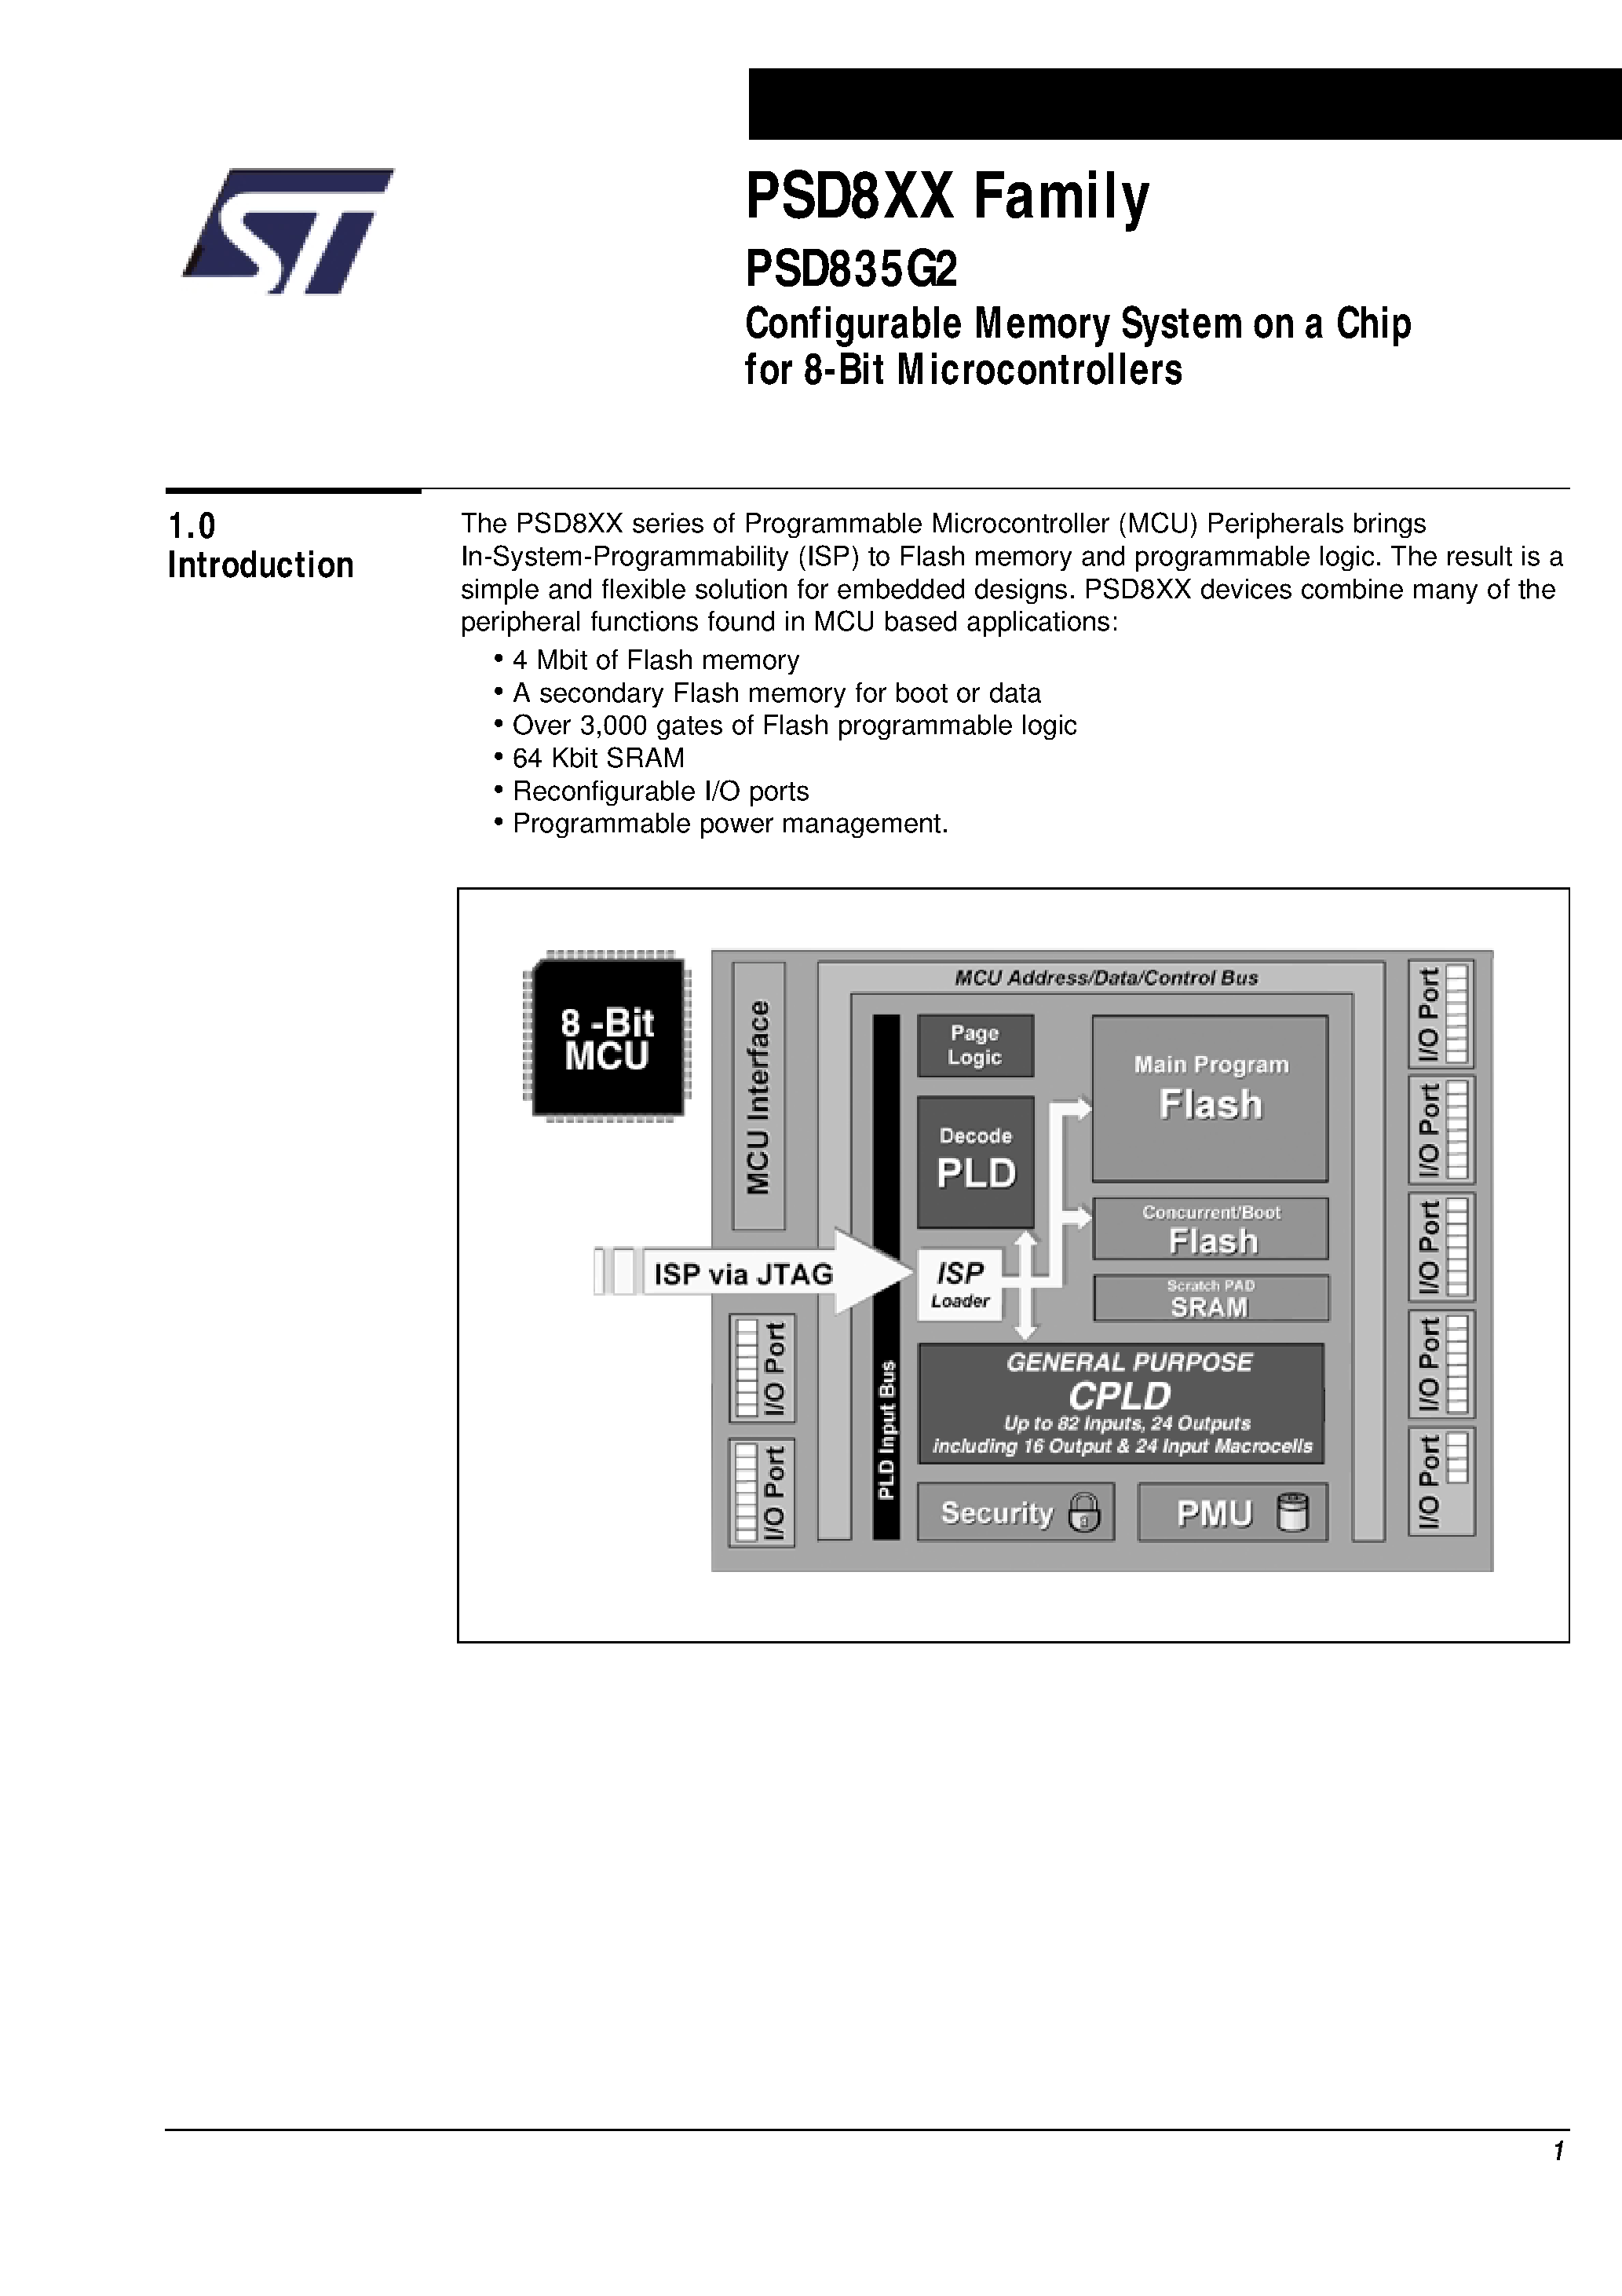 Datasheet PSD835F1-A-15B81I - Configurable Memory System on a Chip for 8-Bit Microcontrollers page 2